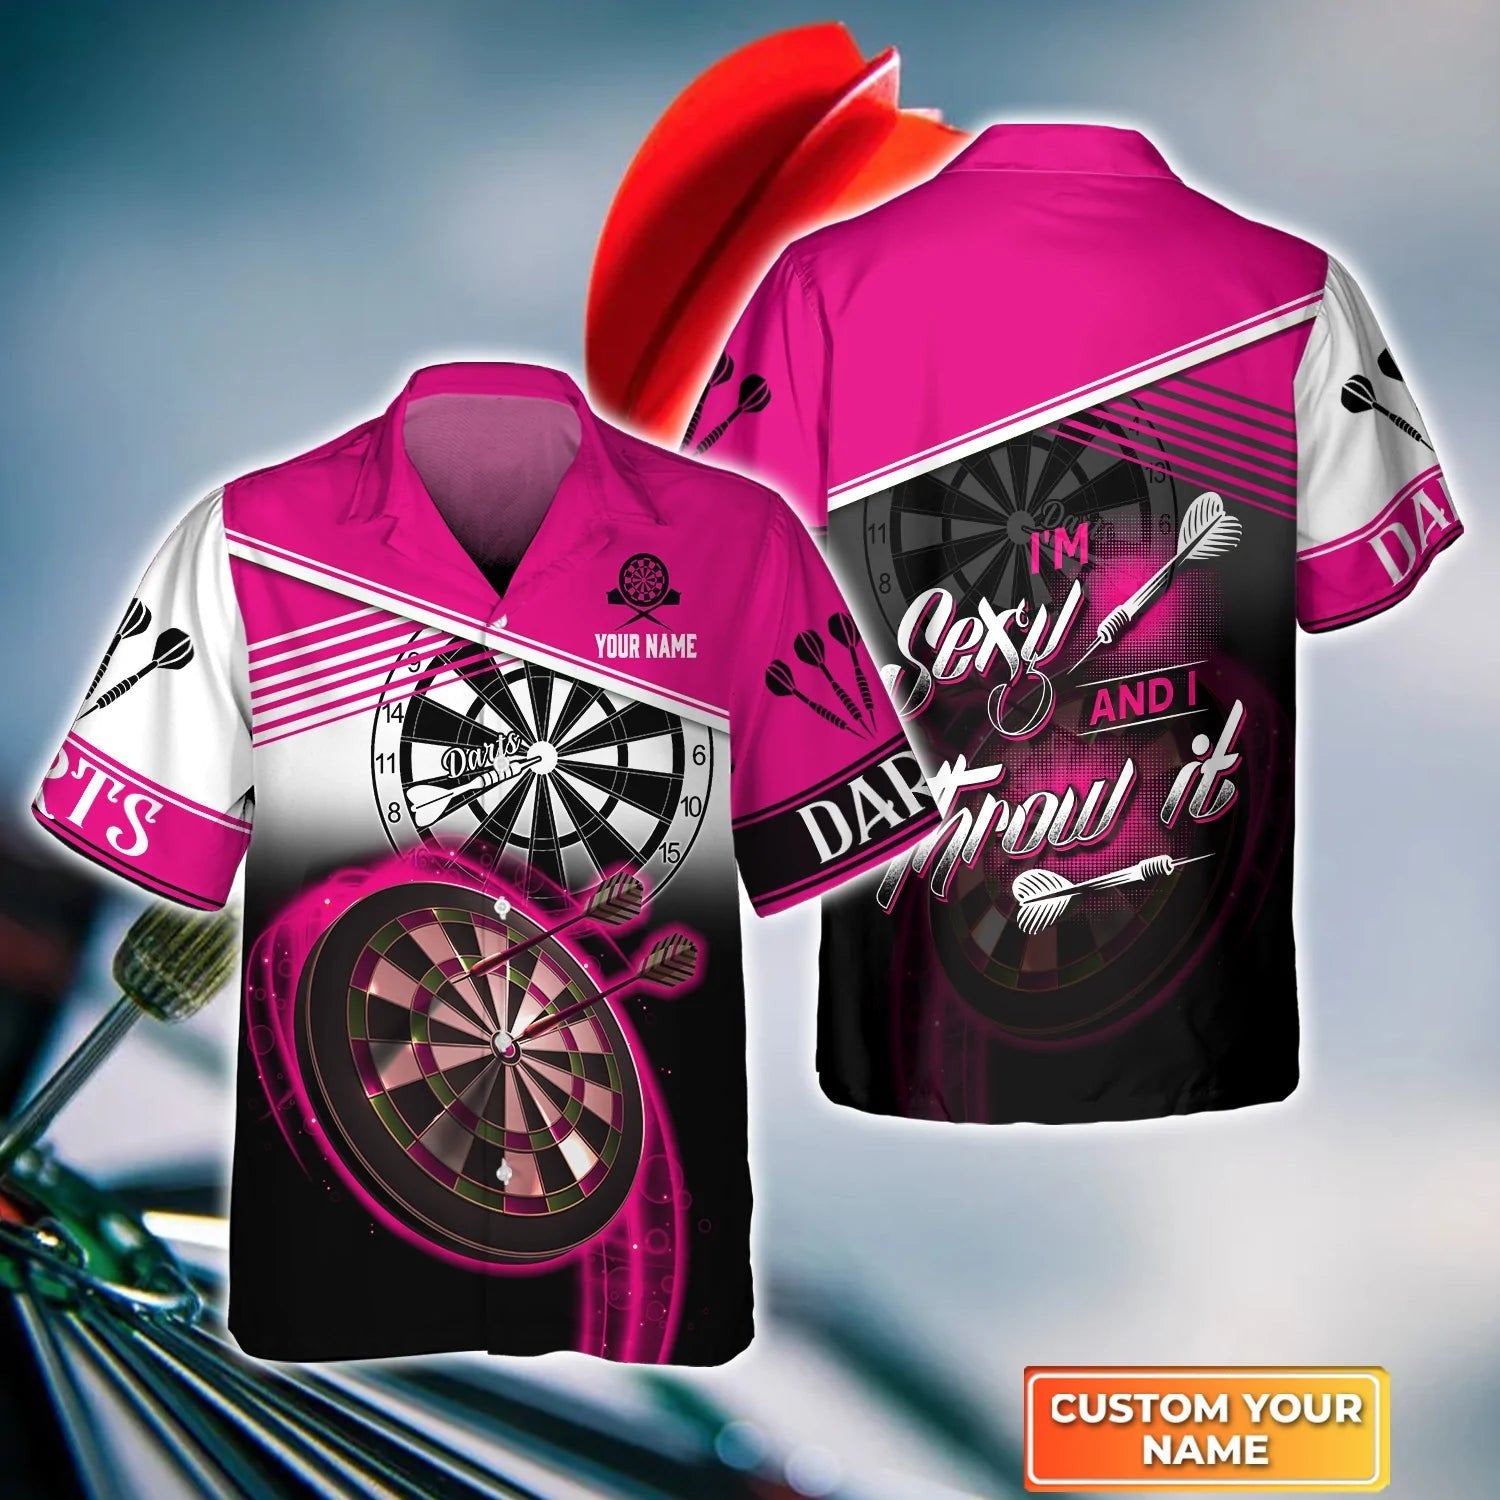 Throwing Bulleyes Dartboart Personalized Name 3D Hawaiian Shirt For Darts Team Player